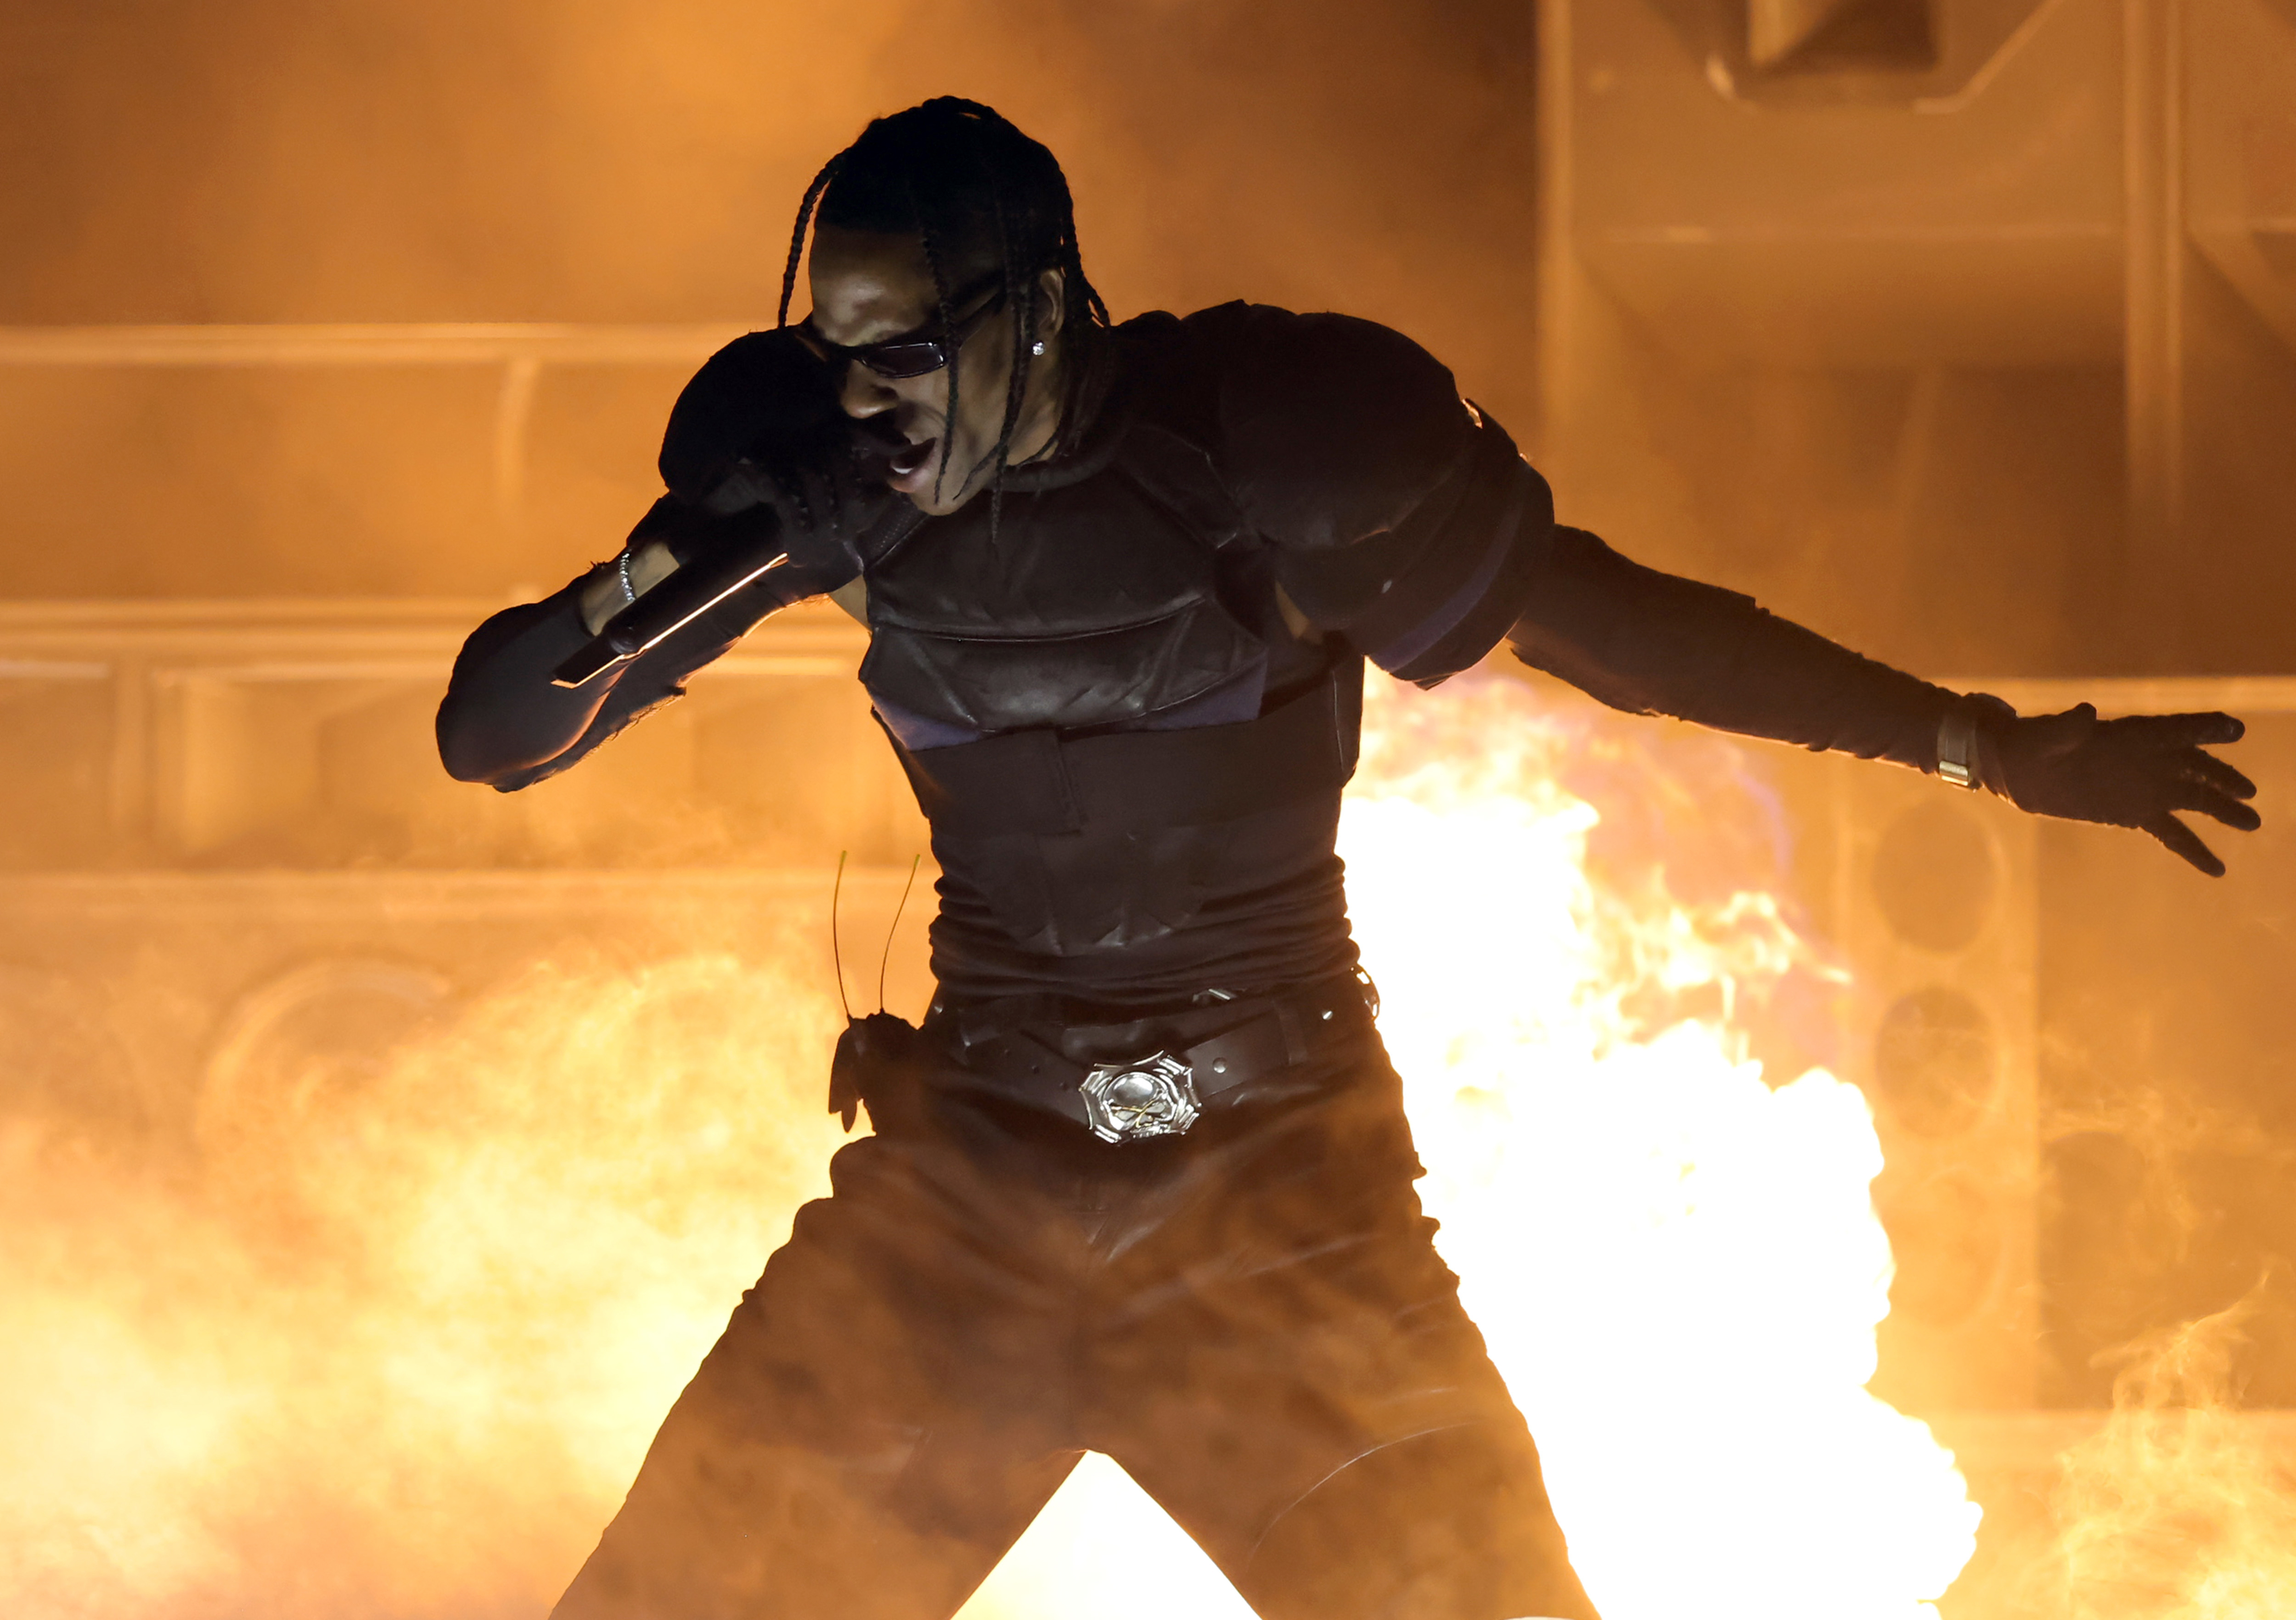 Travis Scott performing energetically on stage, dressed in a futuristic outfit with flames in the background